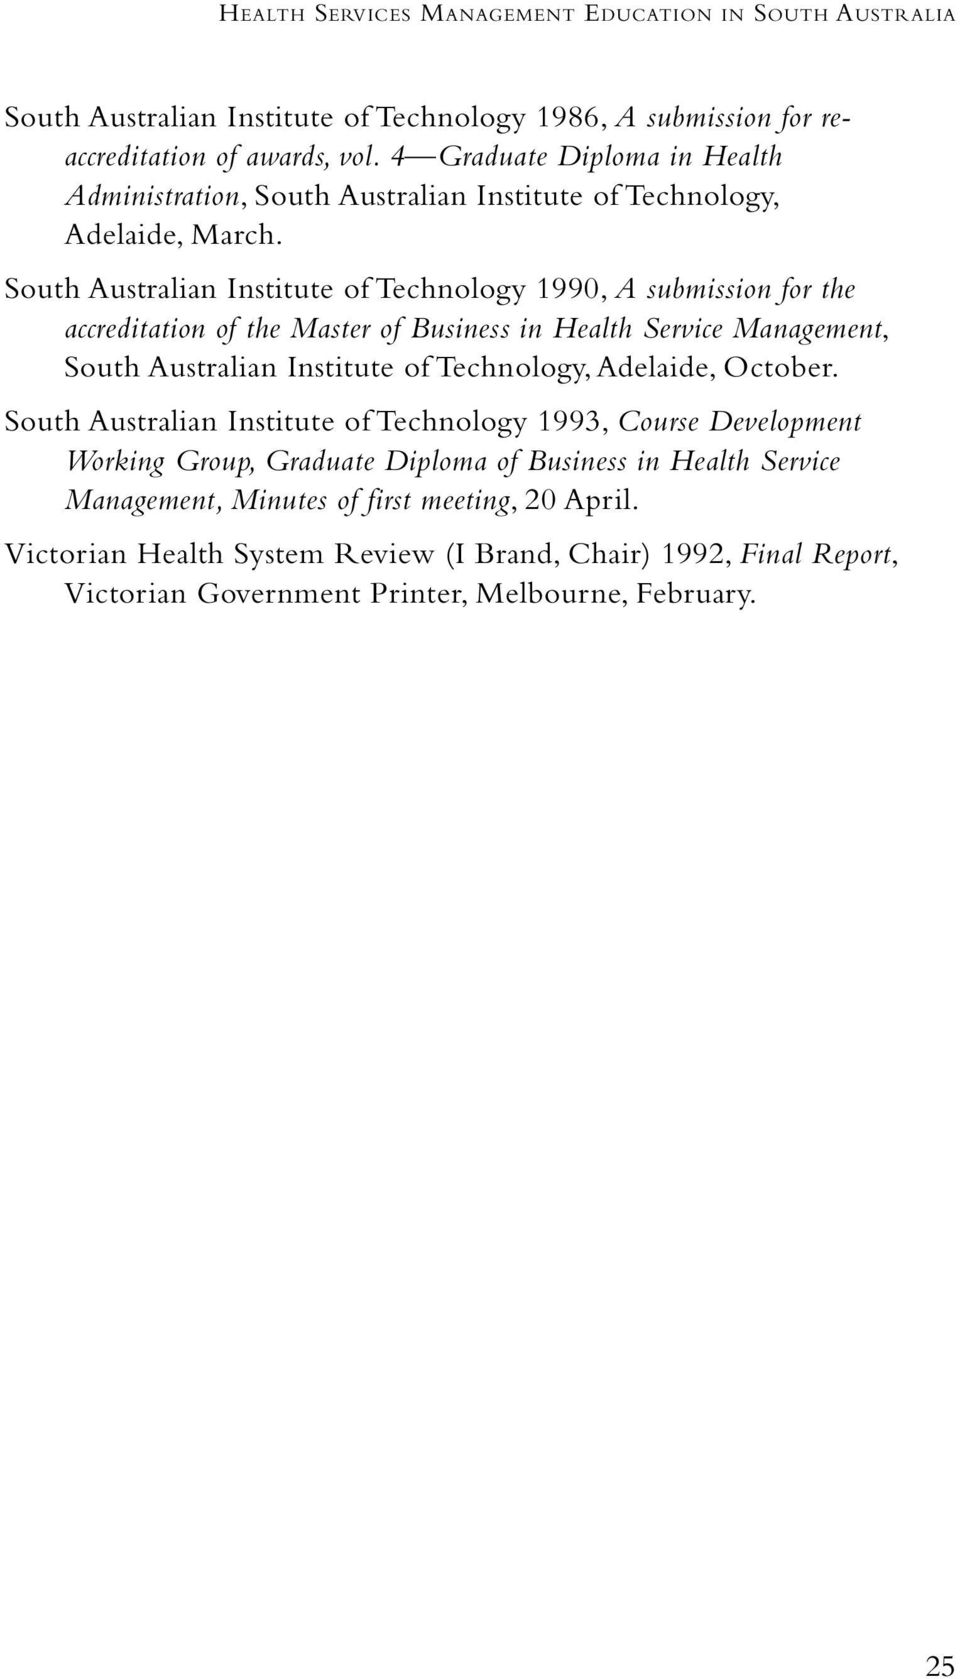 South Australian Institute of Technology 1990, A submission for the accreditation of the Master of Business in Health Service Management, South Australian Institute of